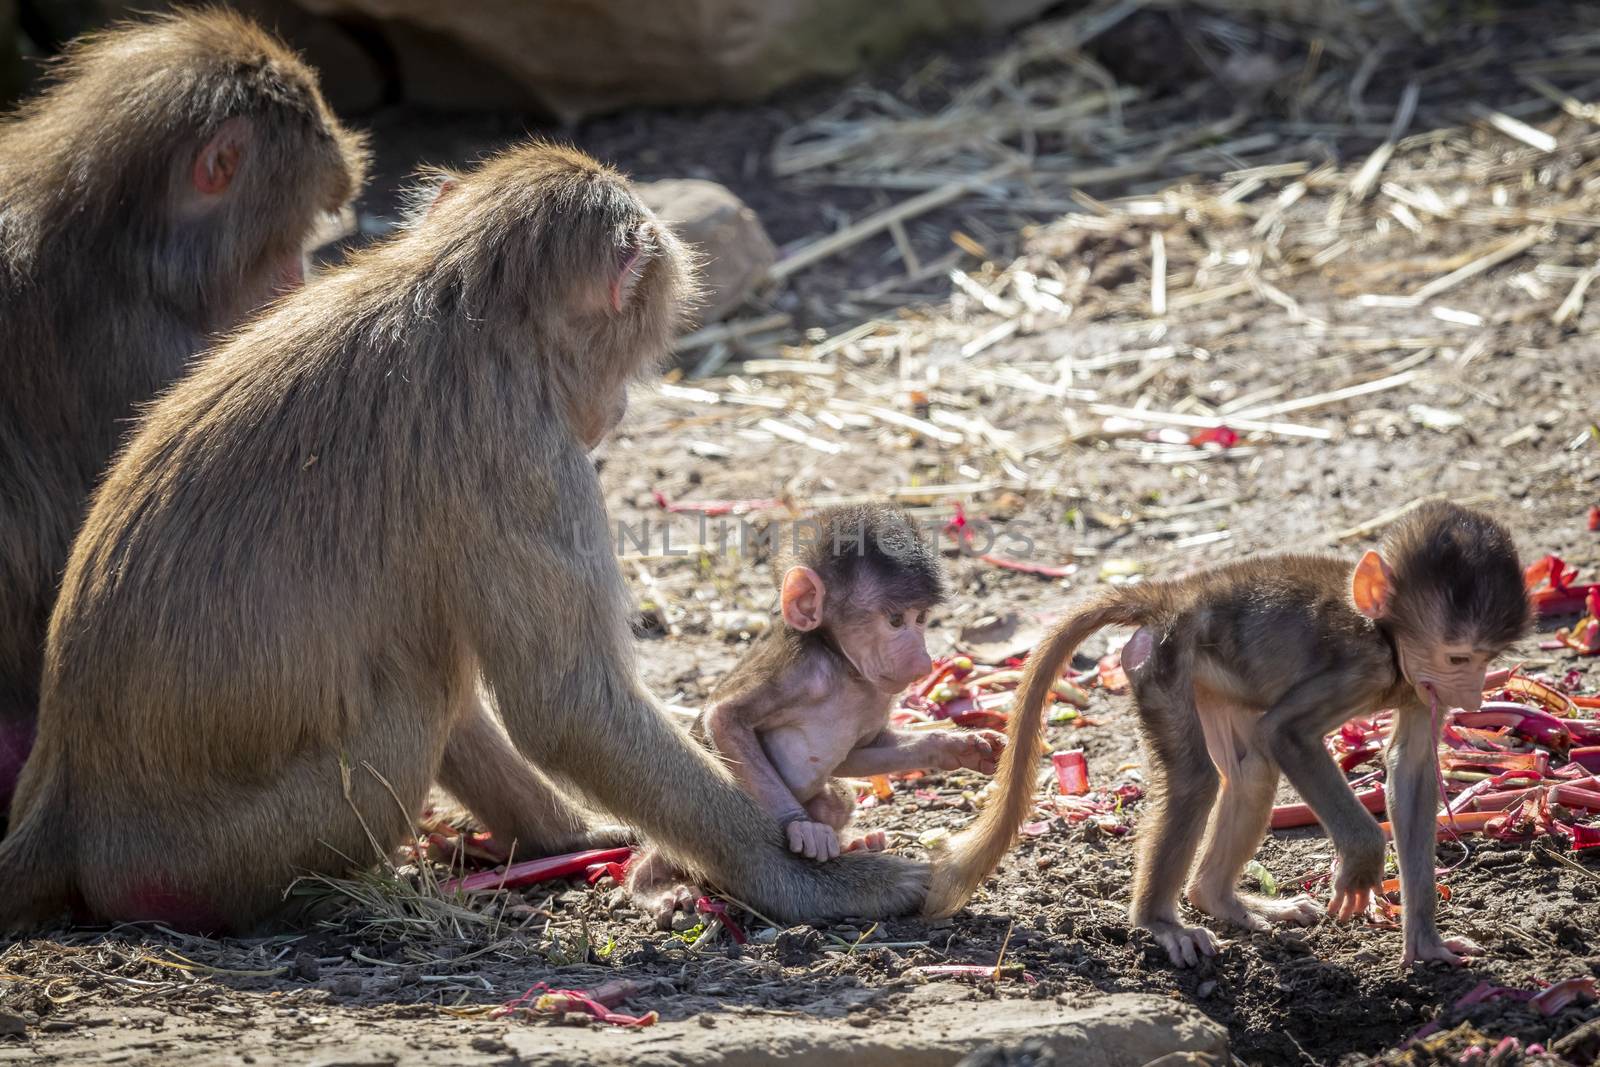 A baby Hamadryas Baboon playing outside with their family unit by WittkePhotos